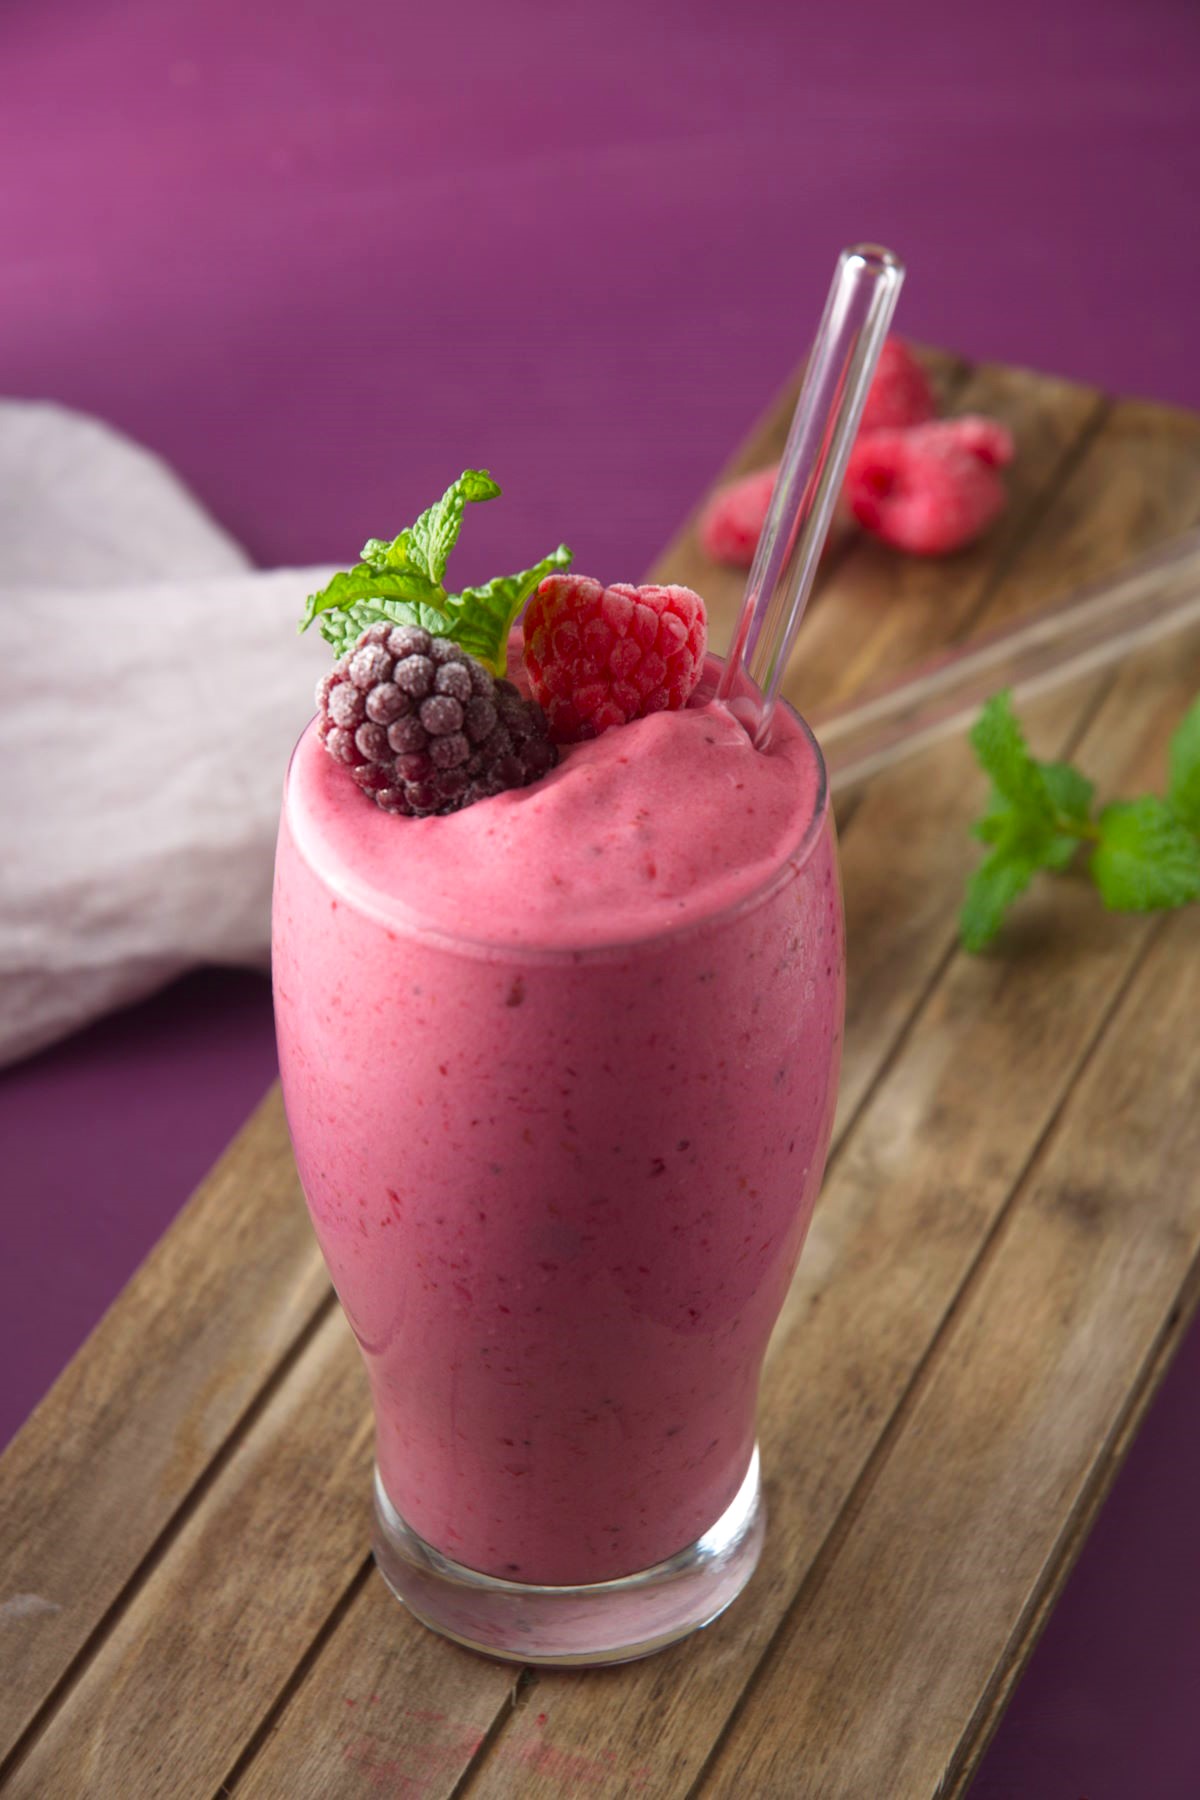 Triple berry smoothie in a glass with a clear straw on purple background.